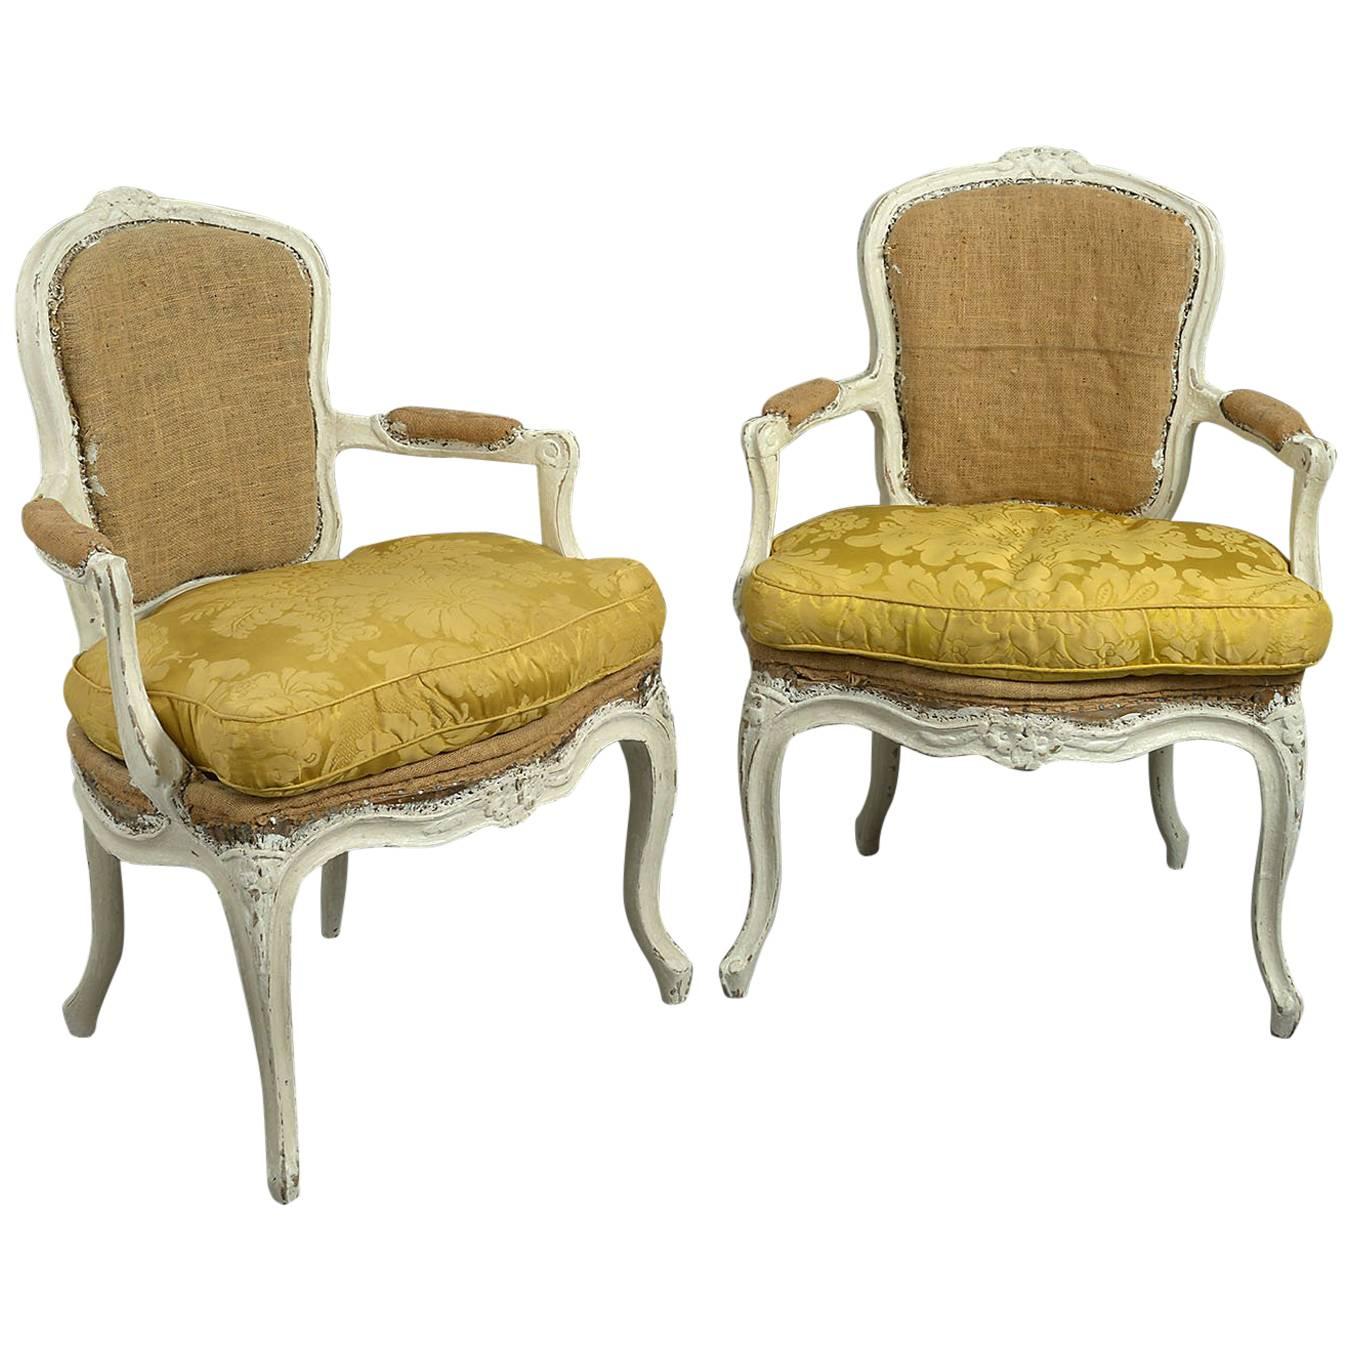 Pair of 18th Century Louis XV Painted Fauteuils or Open Armchairs For Sale